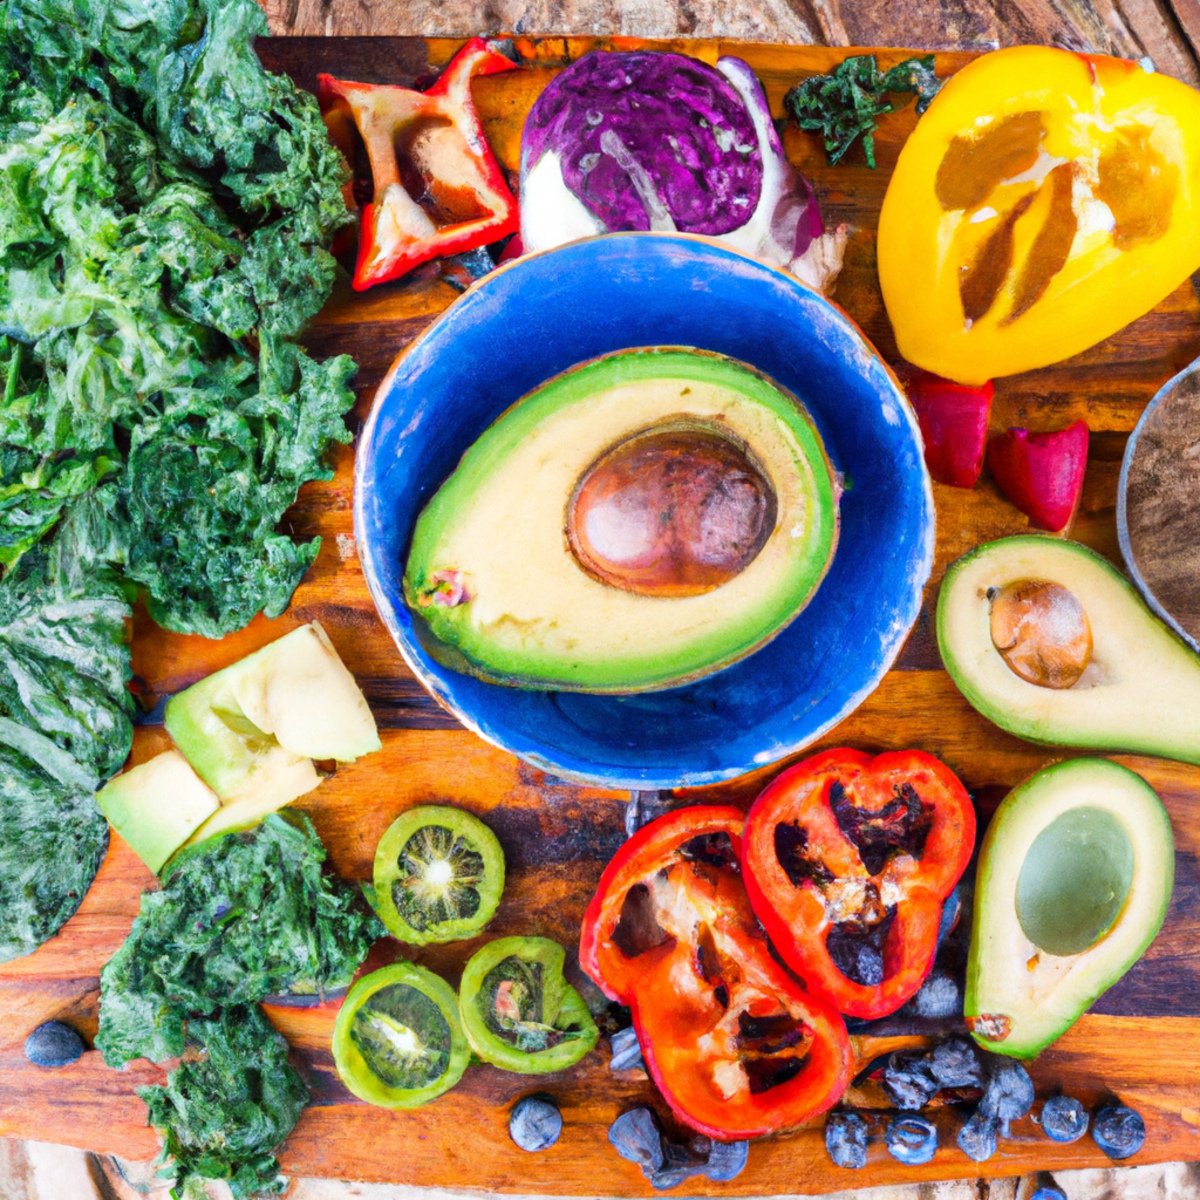 The photo captures a colorful array of superfoods arranged on a wooden cutting board. In the center, a ripe avocado is sliced open, revealing its creamy green flesh. Surrounding it are vibrant red and yellow bell peppers, sliced into thin strips, and a handful of bright green kale leaves. A small bowl of antioxidant-rich blueberries sits off to the side, while a sprinkle of chia seeds adds a crunchy texture to the mix. The photo exudes health and vitality, inviting the reader to explore the transformative power of these natural superfoods.